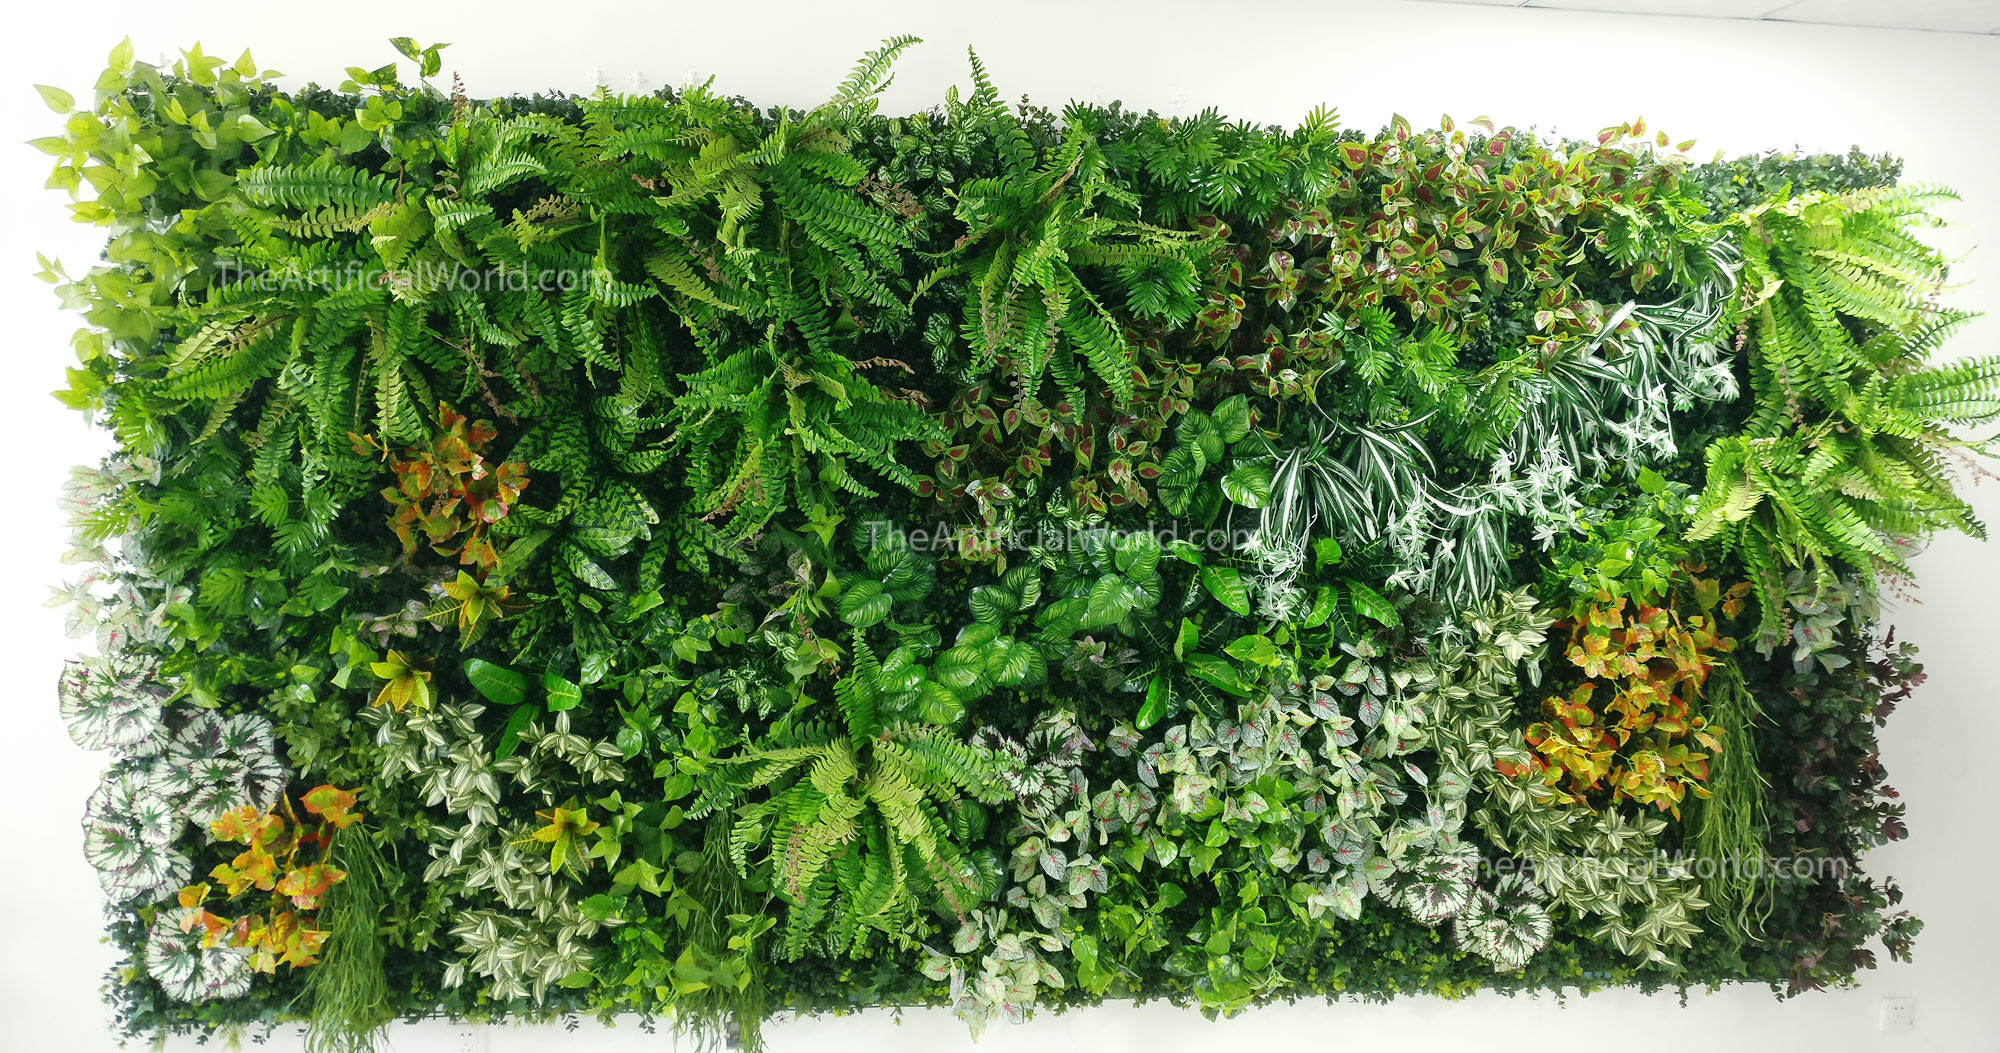 Blanket Plant Wall | Artificial hedges, Green walls-the artificial world